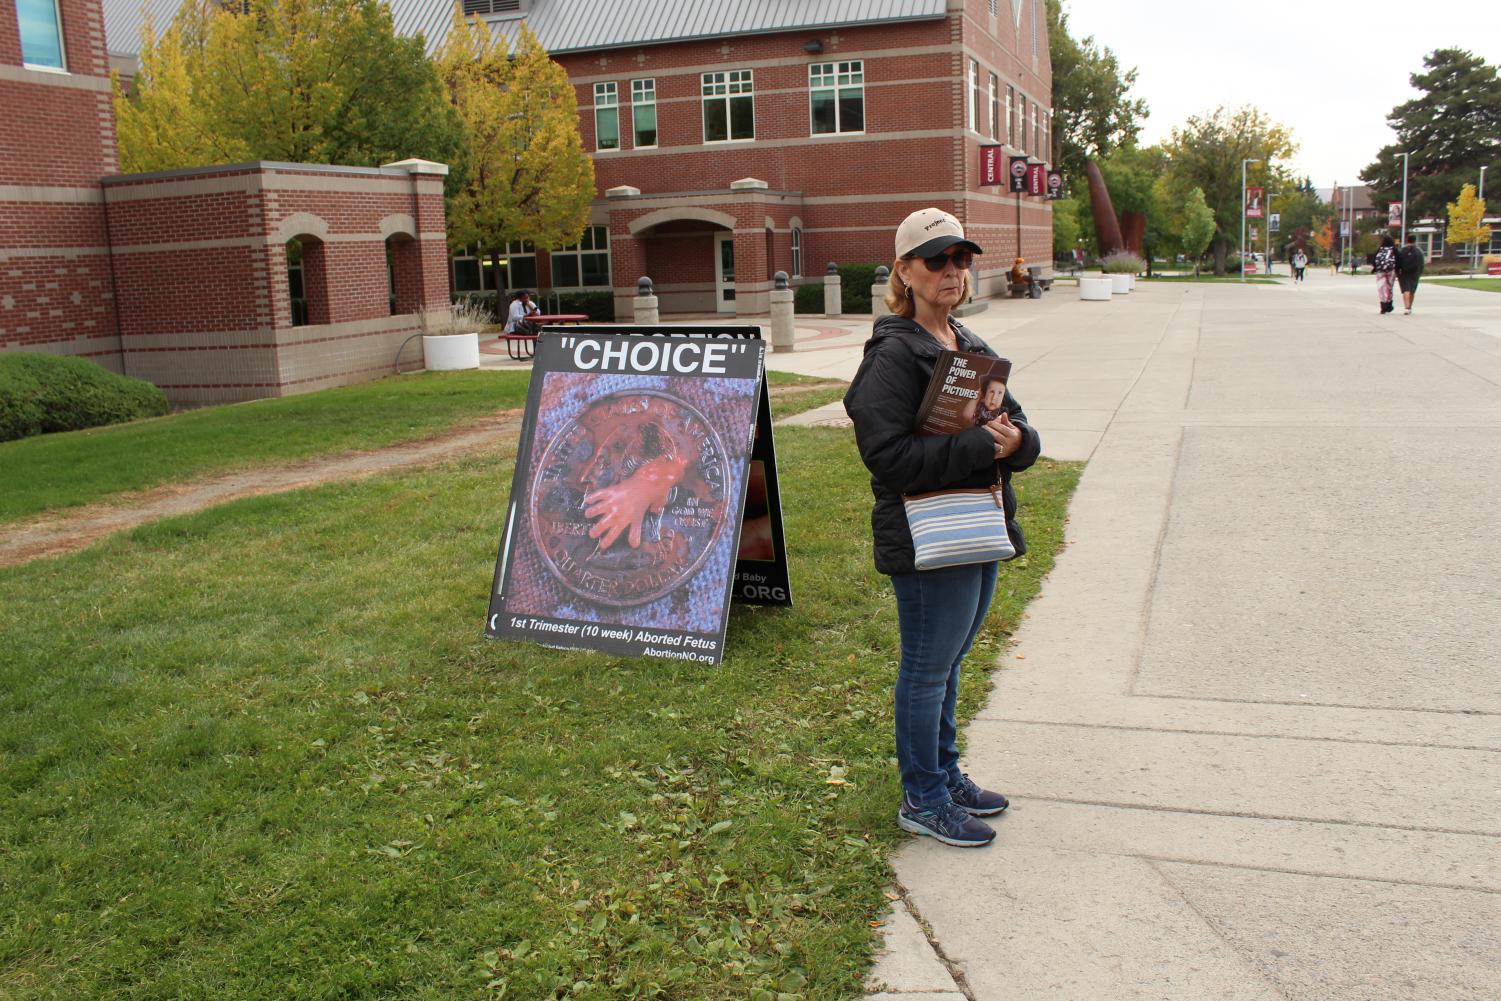 Anti-abortionists+visit+CWU+to+tell+students+about+their+beliefs